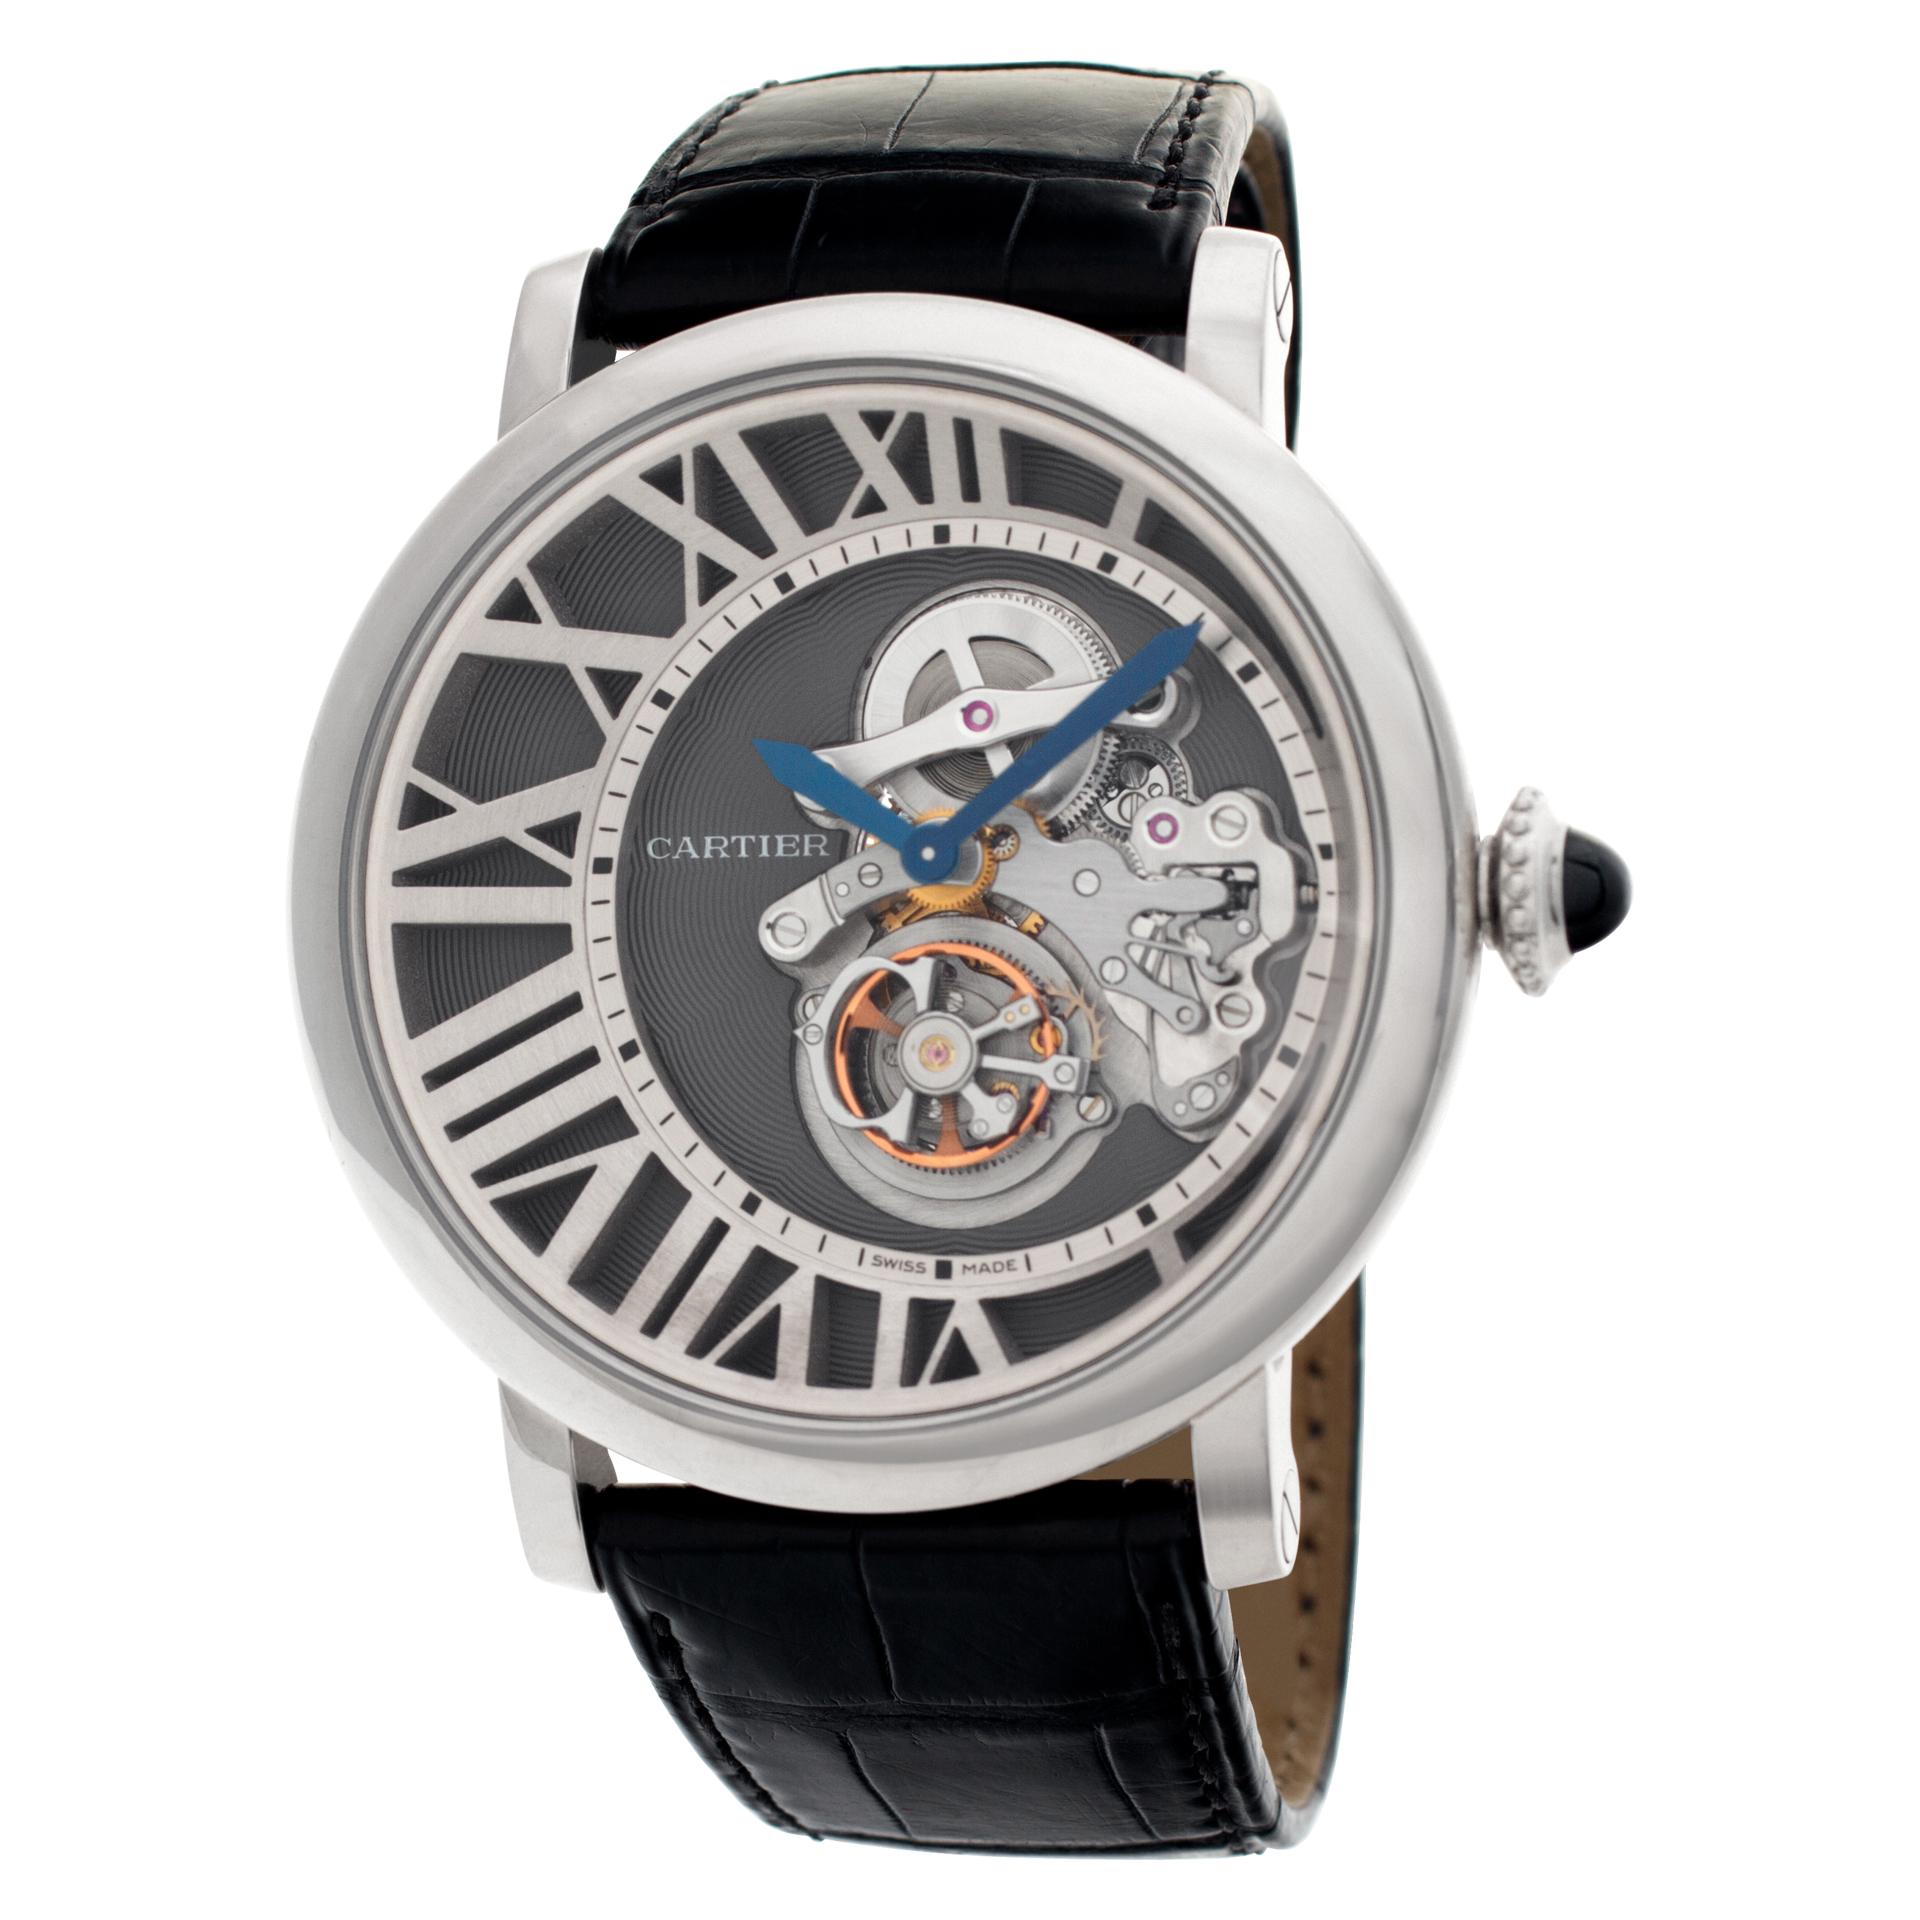 Cadran Love Rotonde de Cartier Reversed Dial Tourbillon with 18K white gold case, beaded crown set with a sapphire cabochon, slate-colored galvanized guilloché dial, 18K white gold grid in the form of Roman numerals, circular satin finish,